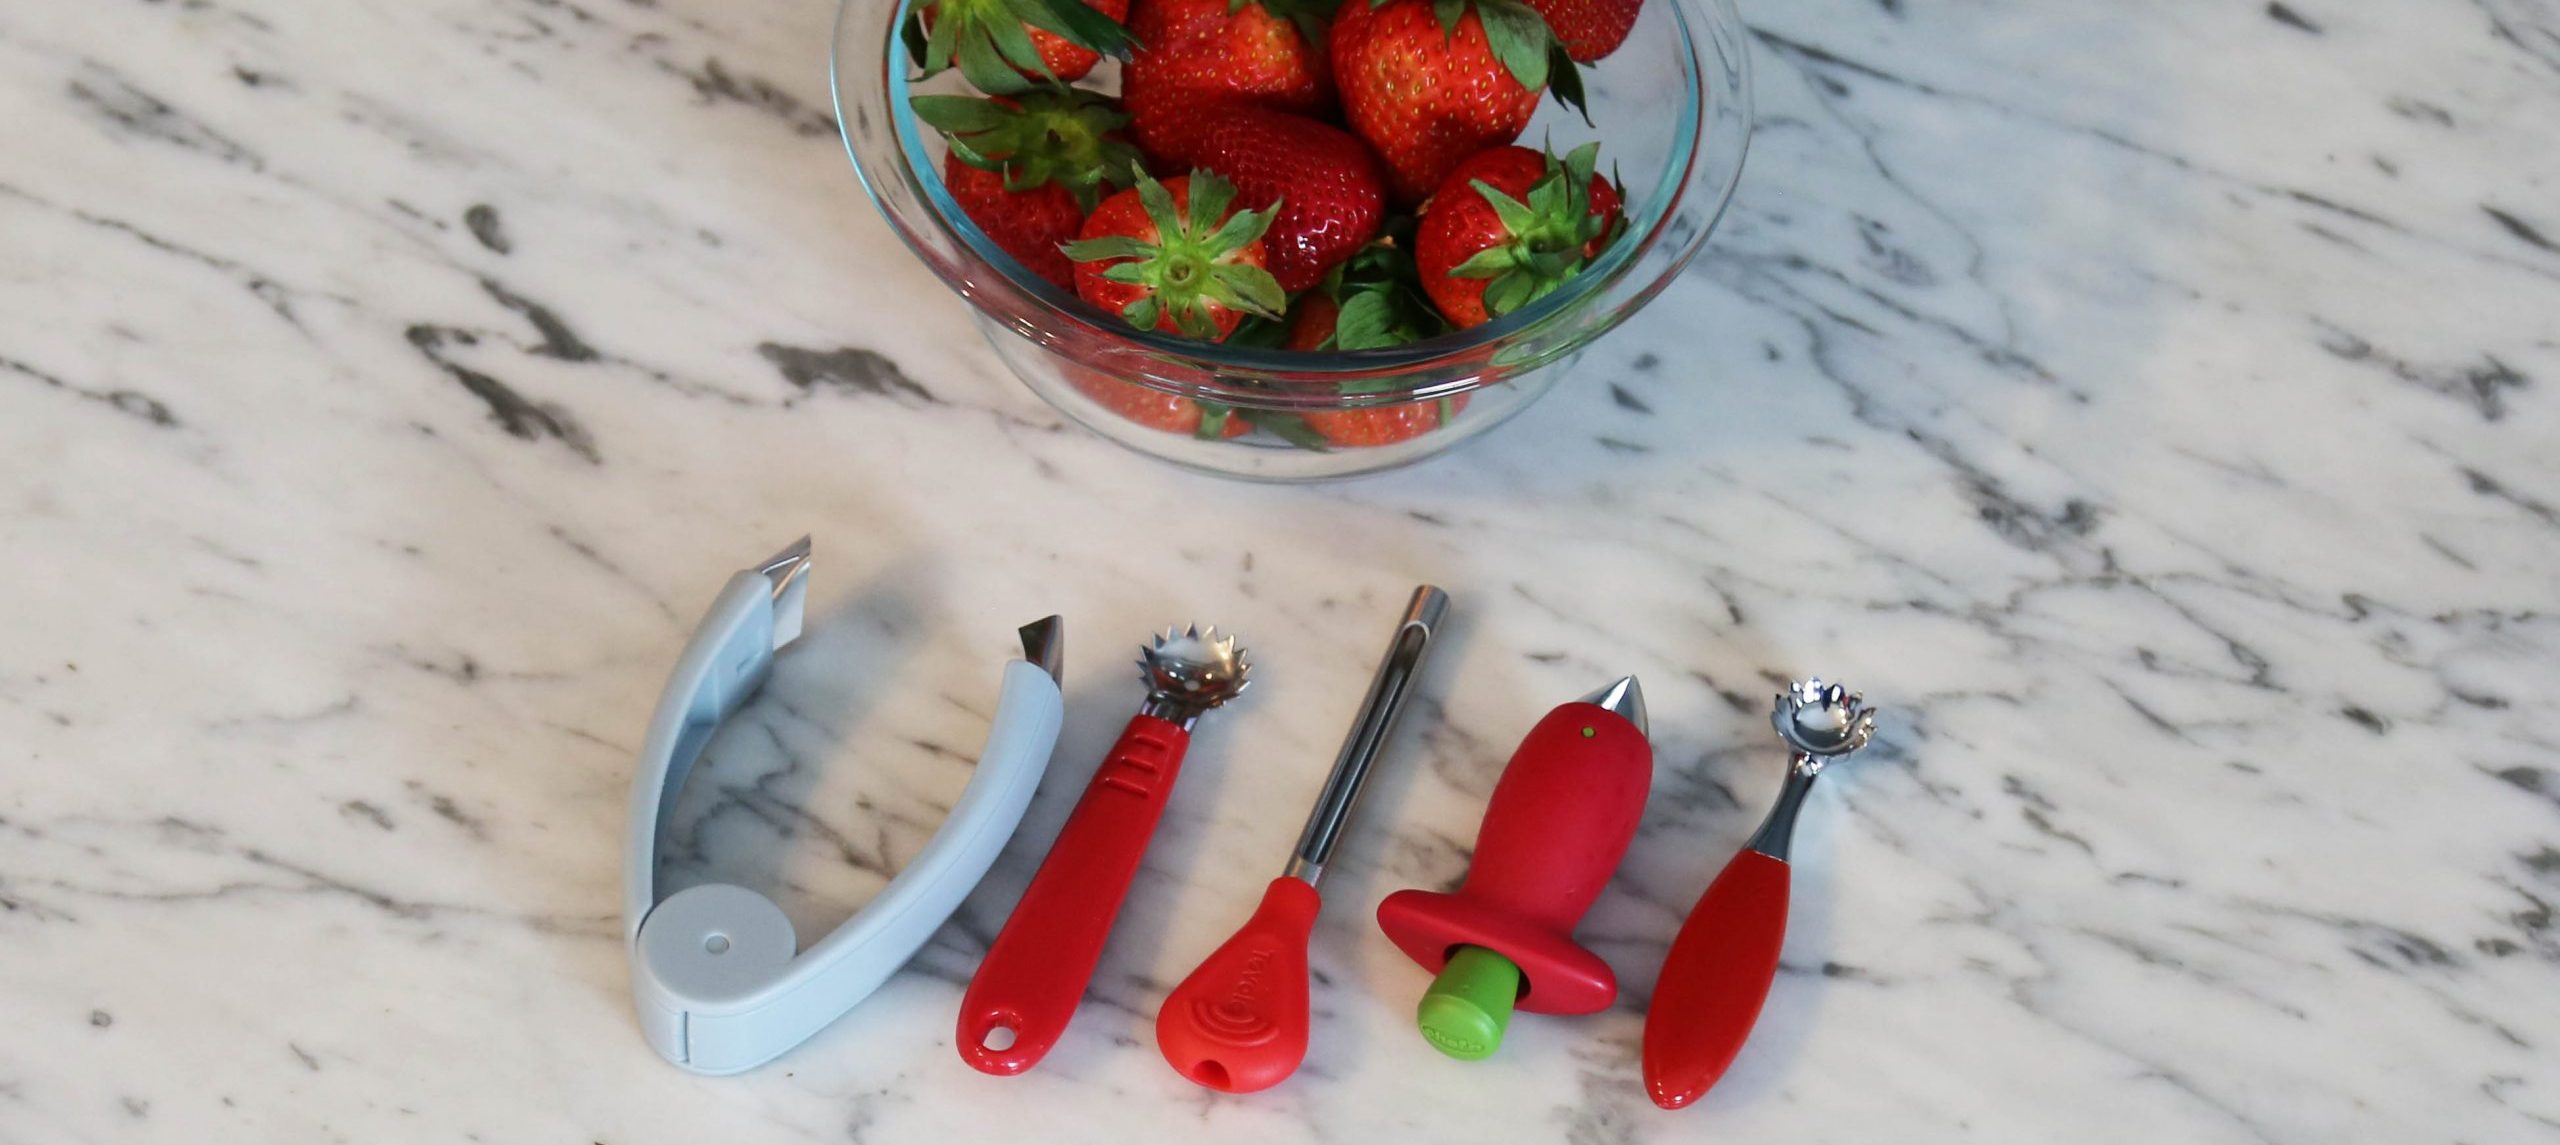 2 Pieces Strawberry Slicer Cutter Set, Strawberry Huller Stem Remover Fruit  Leaves Huller Peeling Tool Kitchen Accessories Corer for Strawberry Tomato